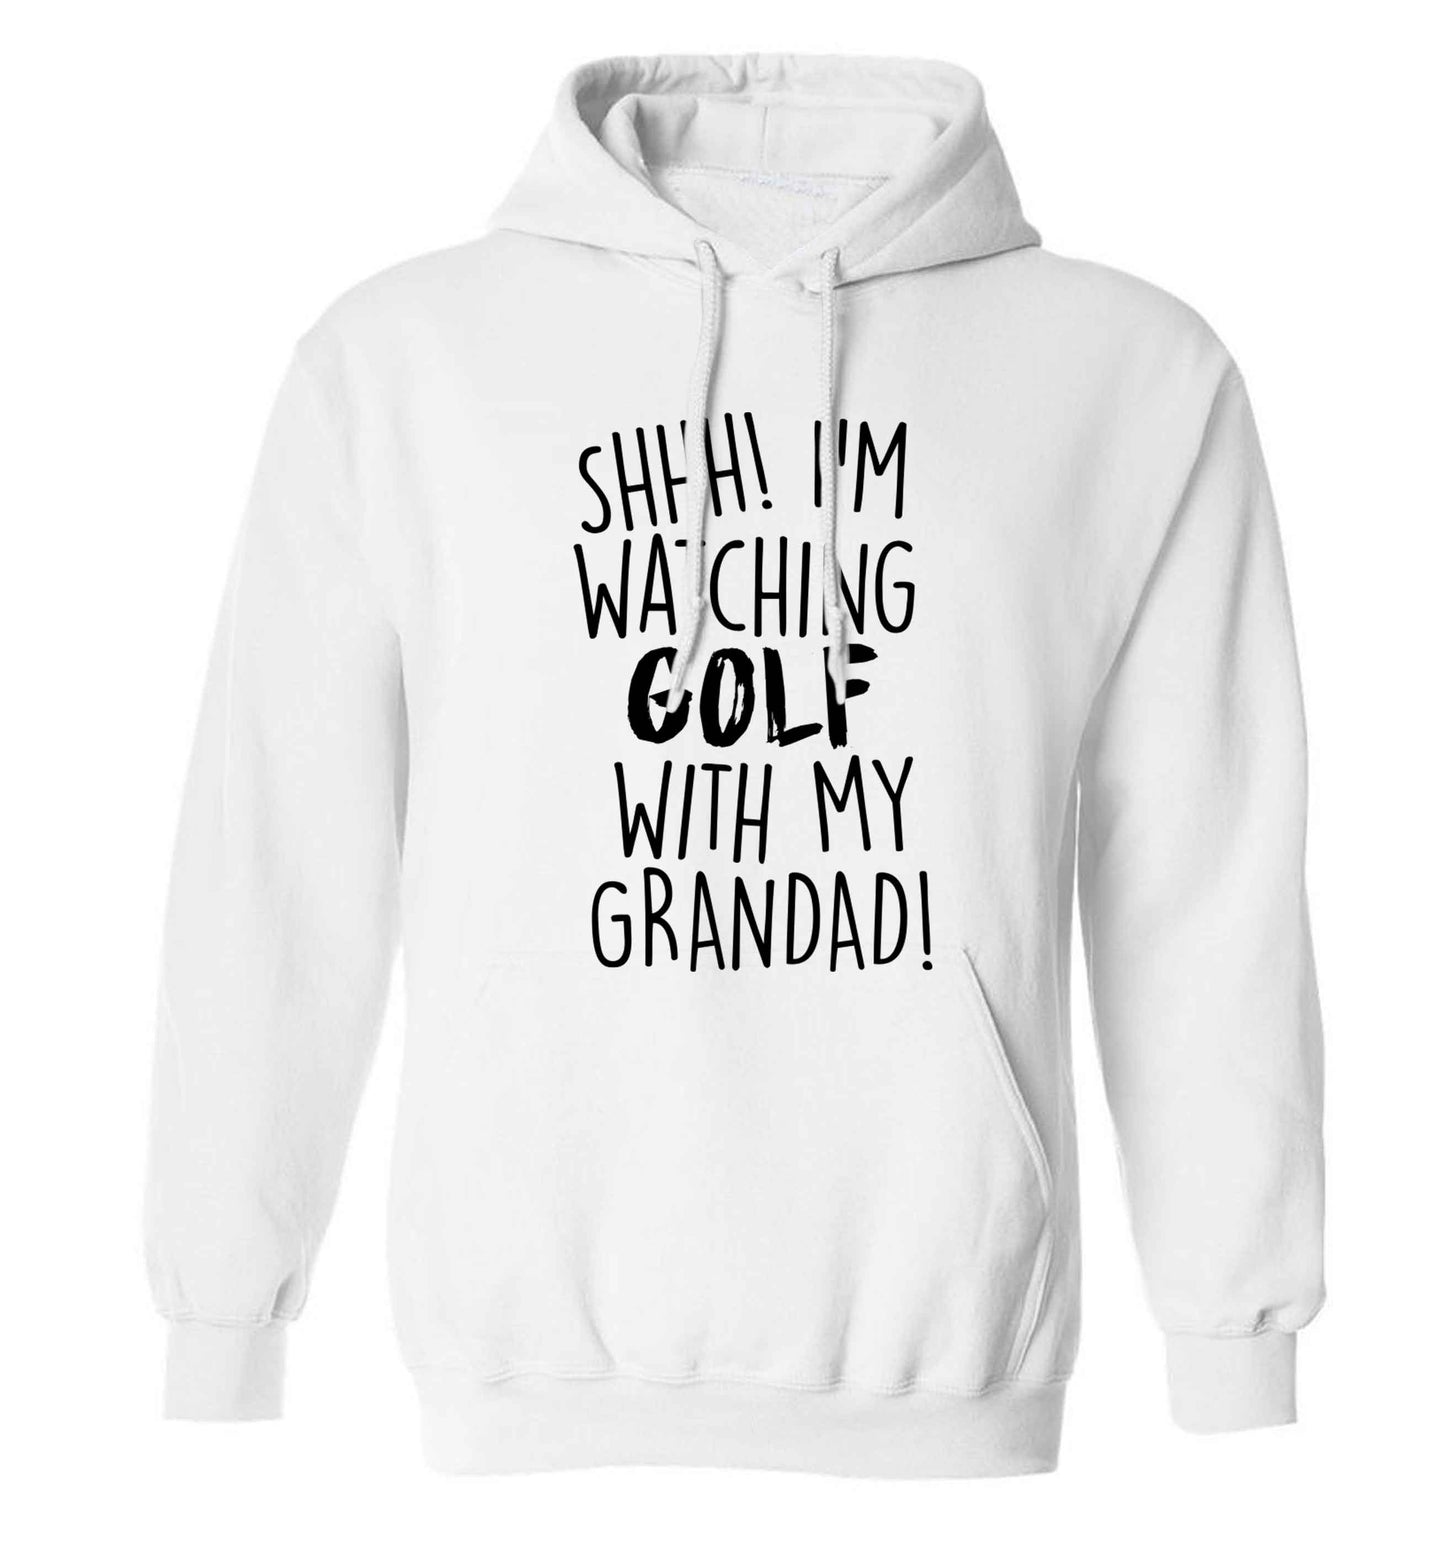 Shh I'm watching golf with my grandad adults unisex white hoodie 2XL